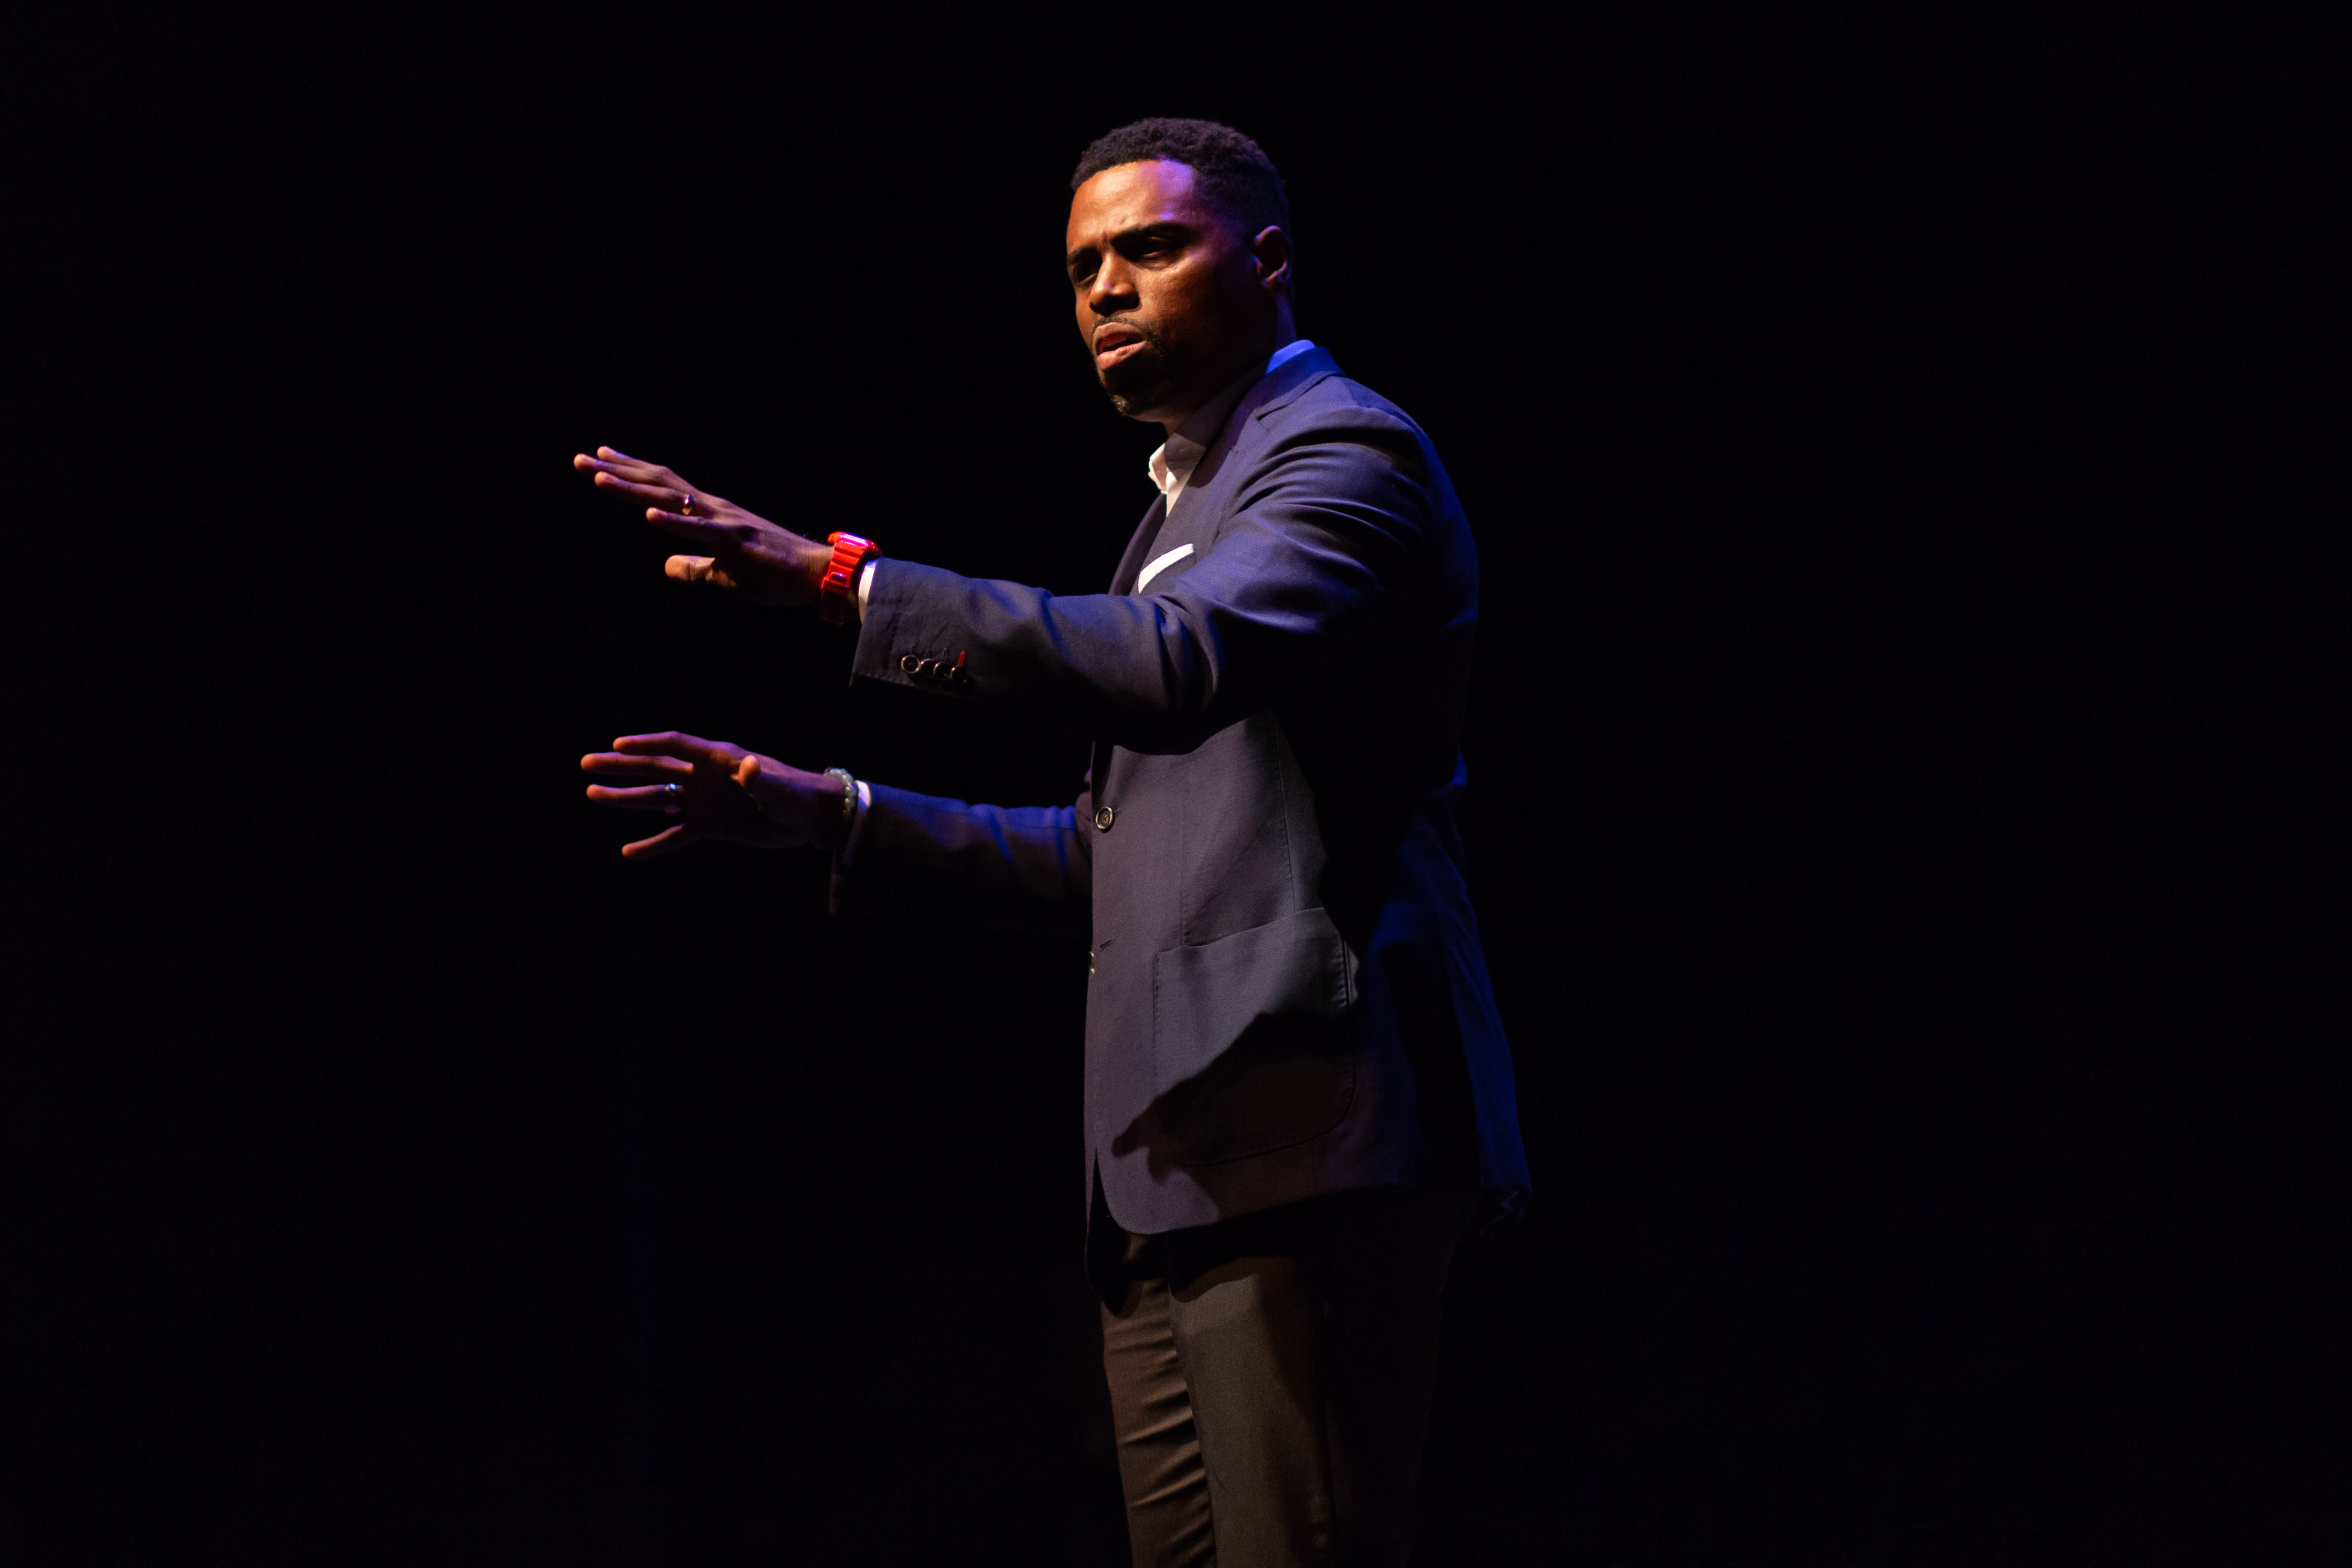 Daron Roberts Speaks at the University Lecture Series